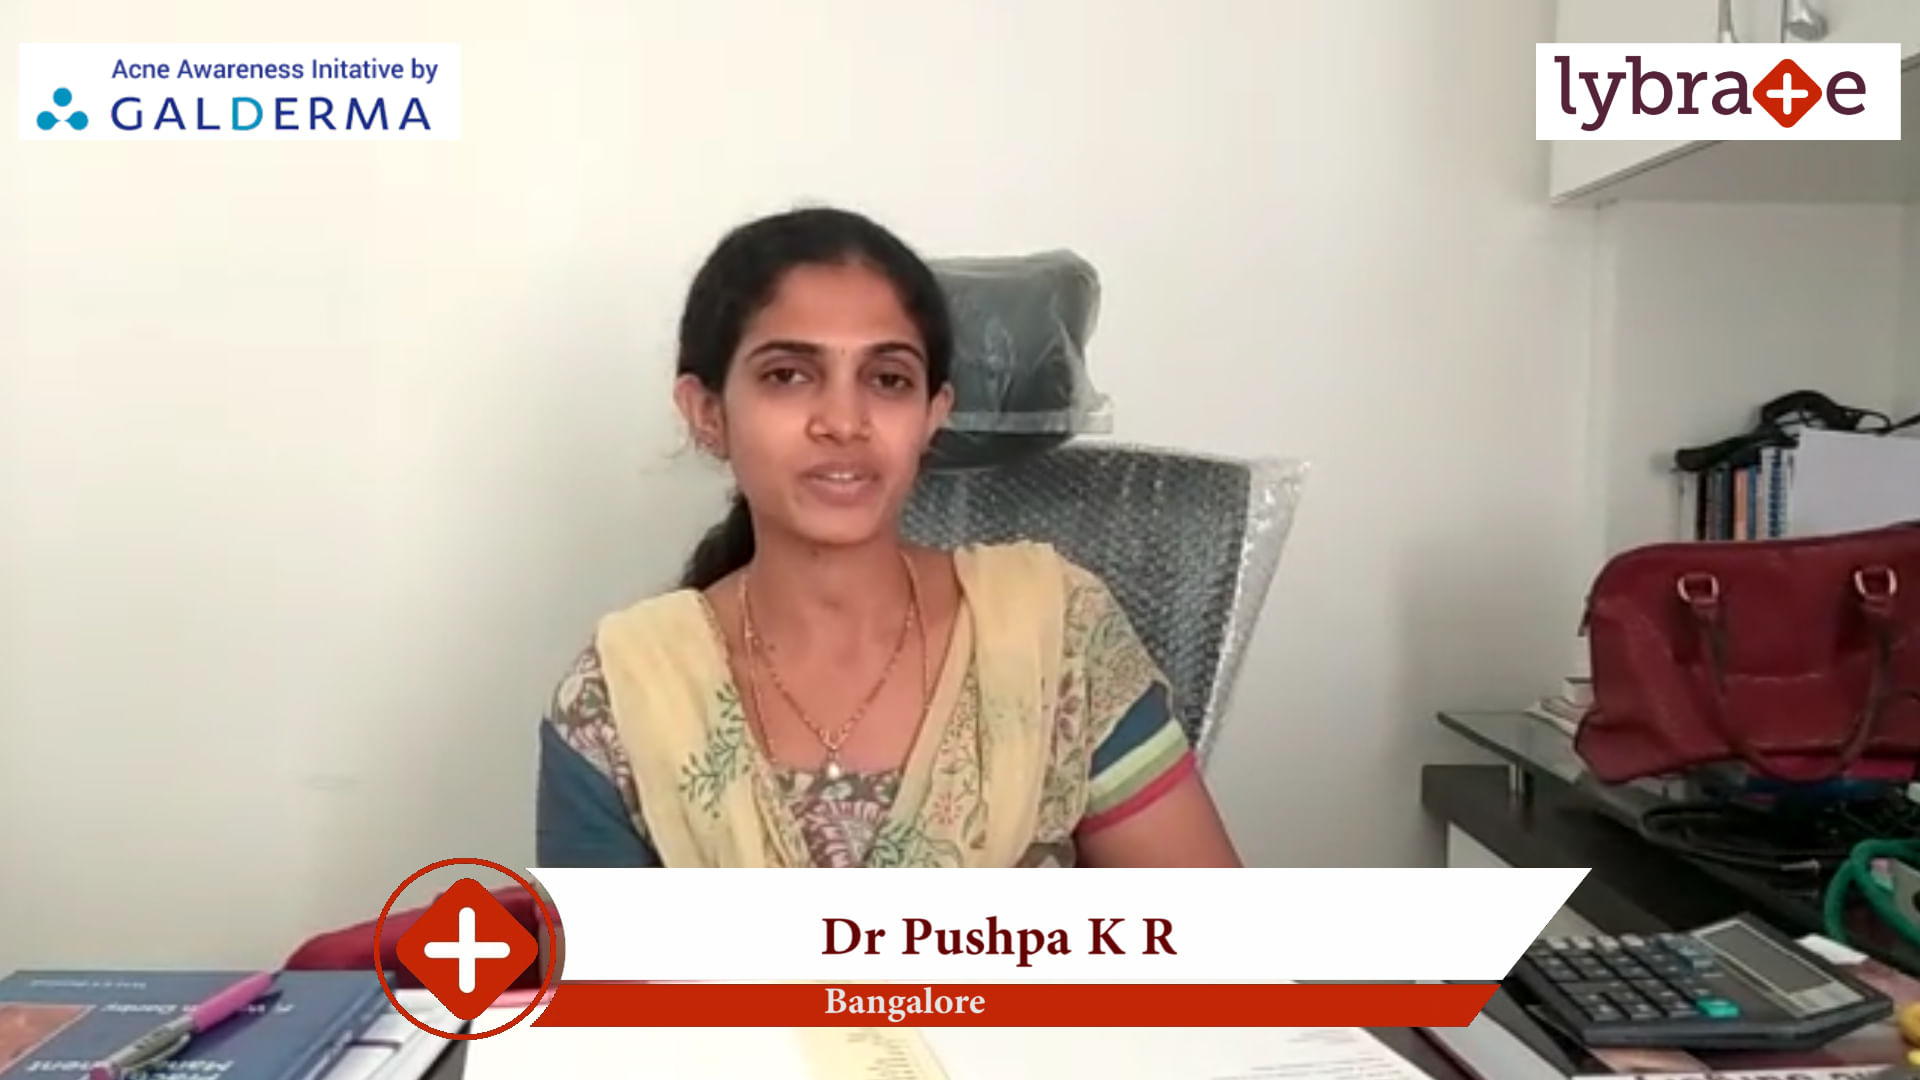 Lybrate | Dr. Pushpa K R speaks on IMPORTANCE OF TREATING ACNE EARLY